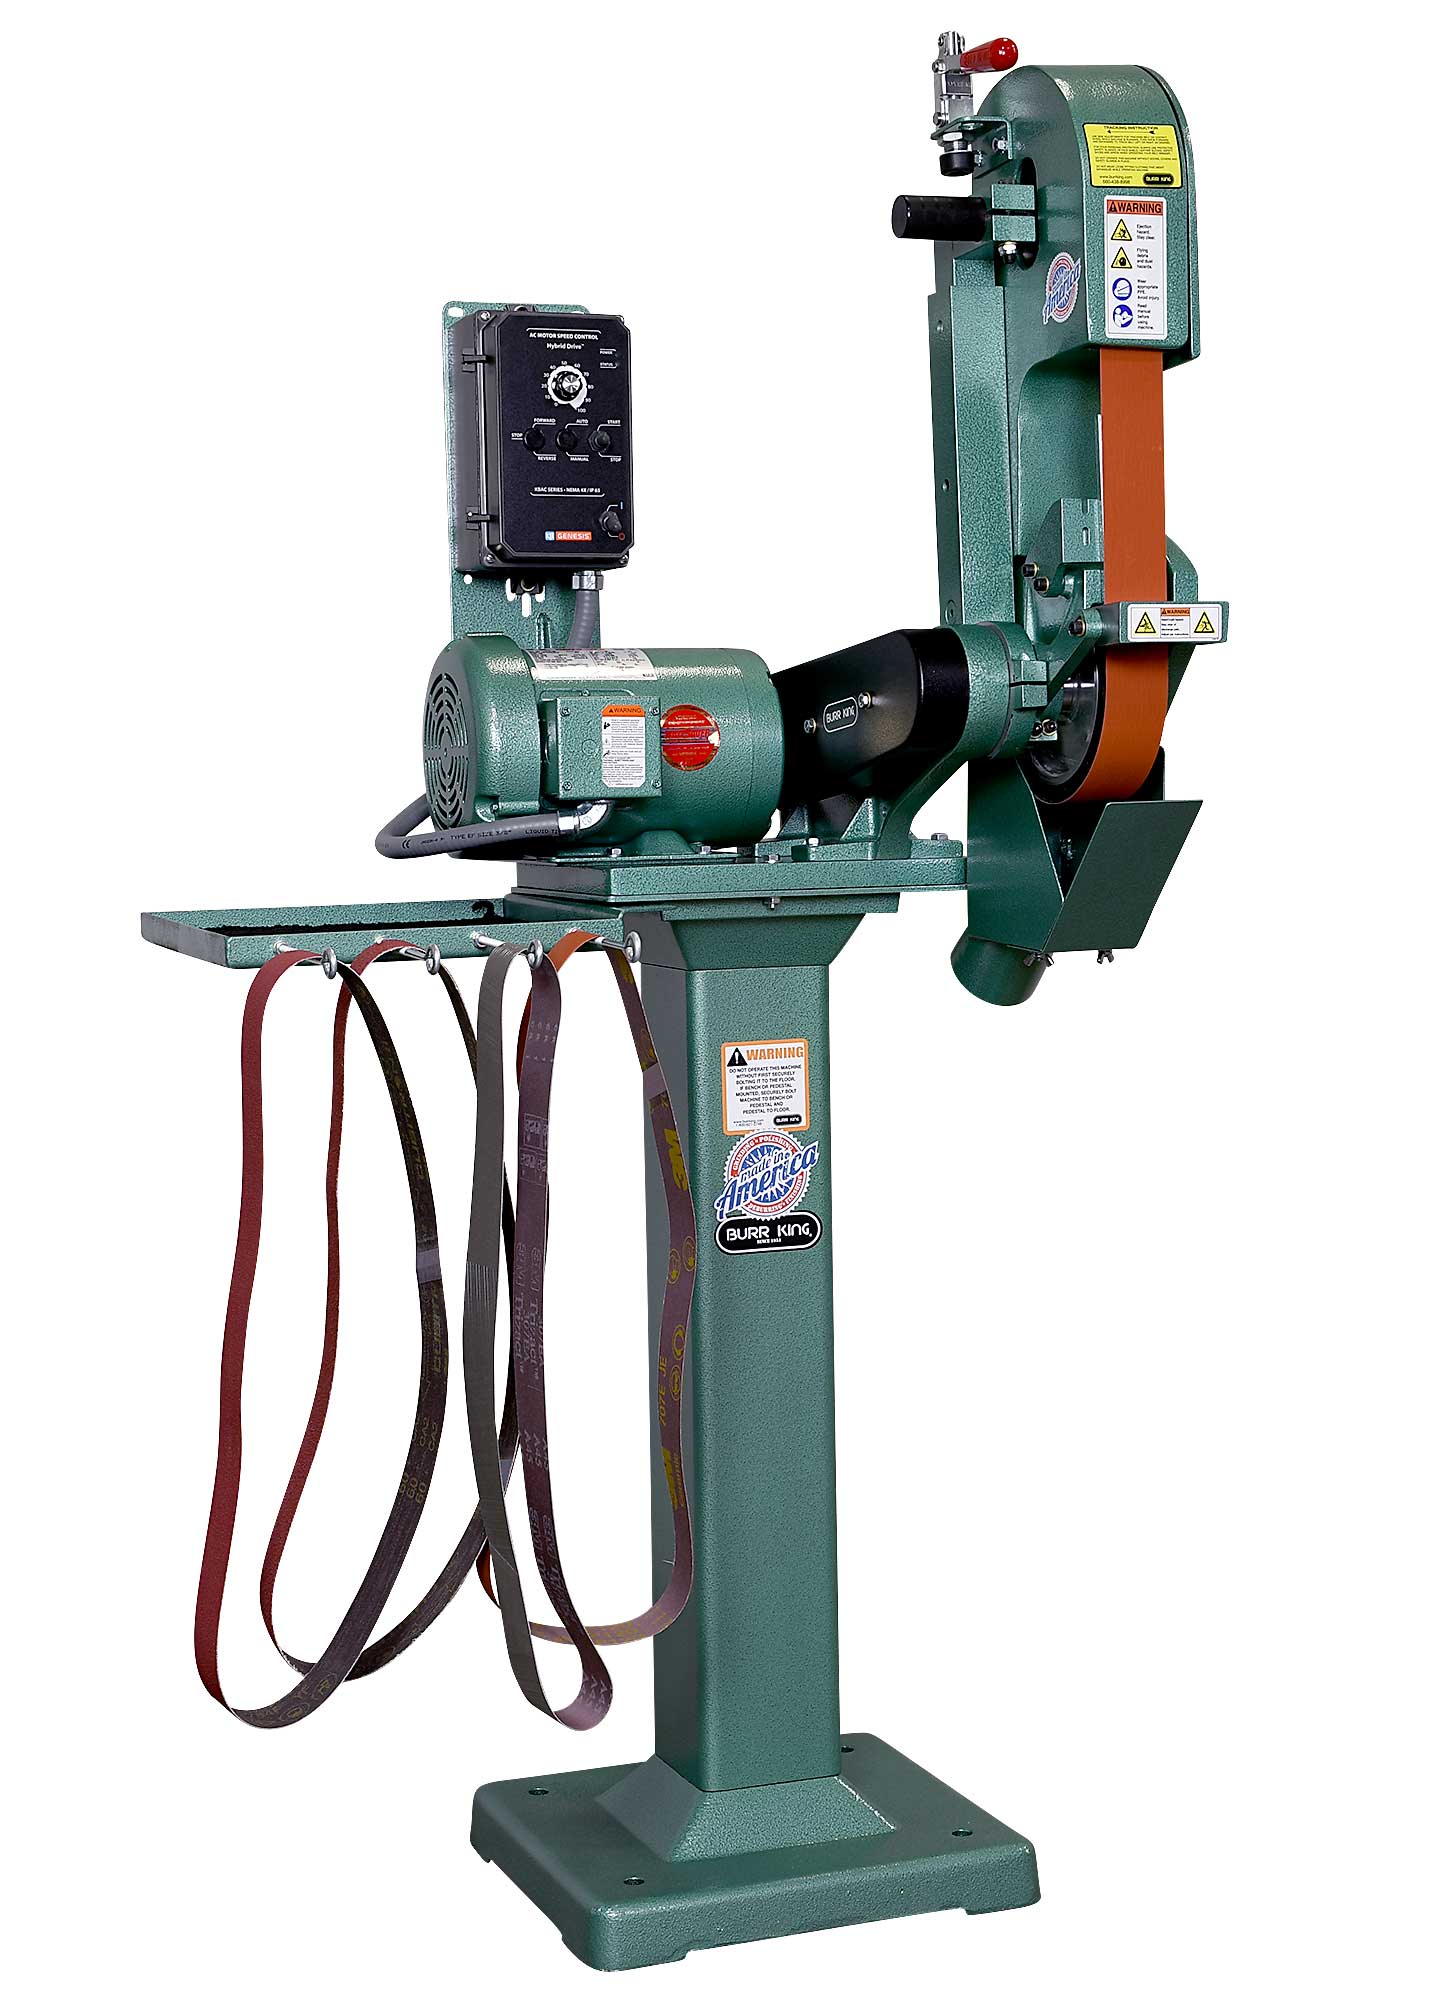 24821 - X400 variable speed belt grinder shown with optional 01 pedestal, 760T-2 tool tray and DS400-1 dust scoop